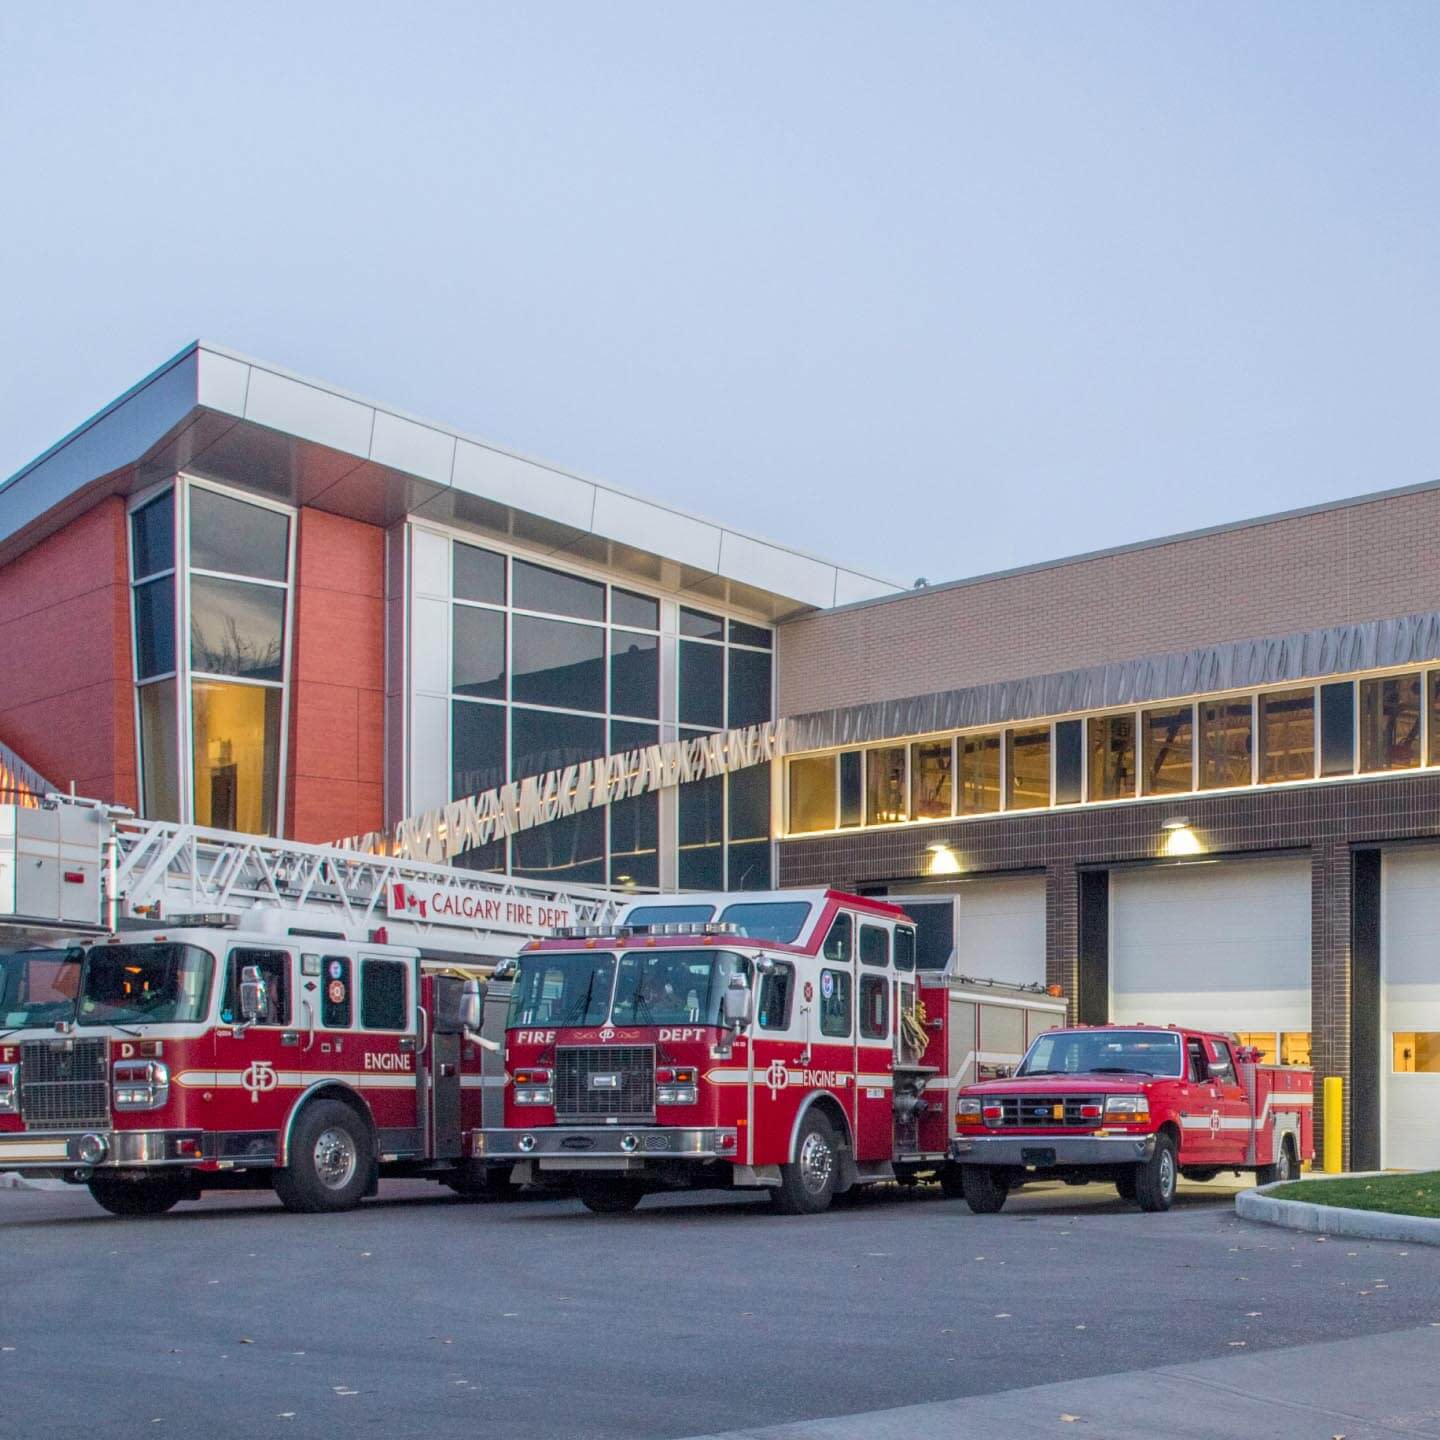 Firehall (exterior) - completed project by Keller.